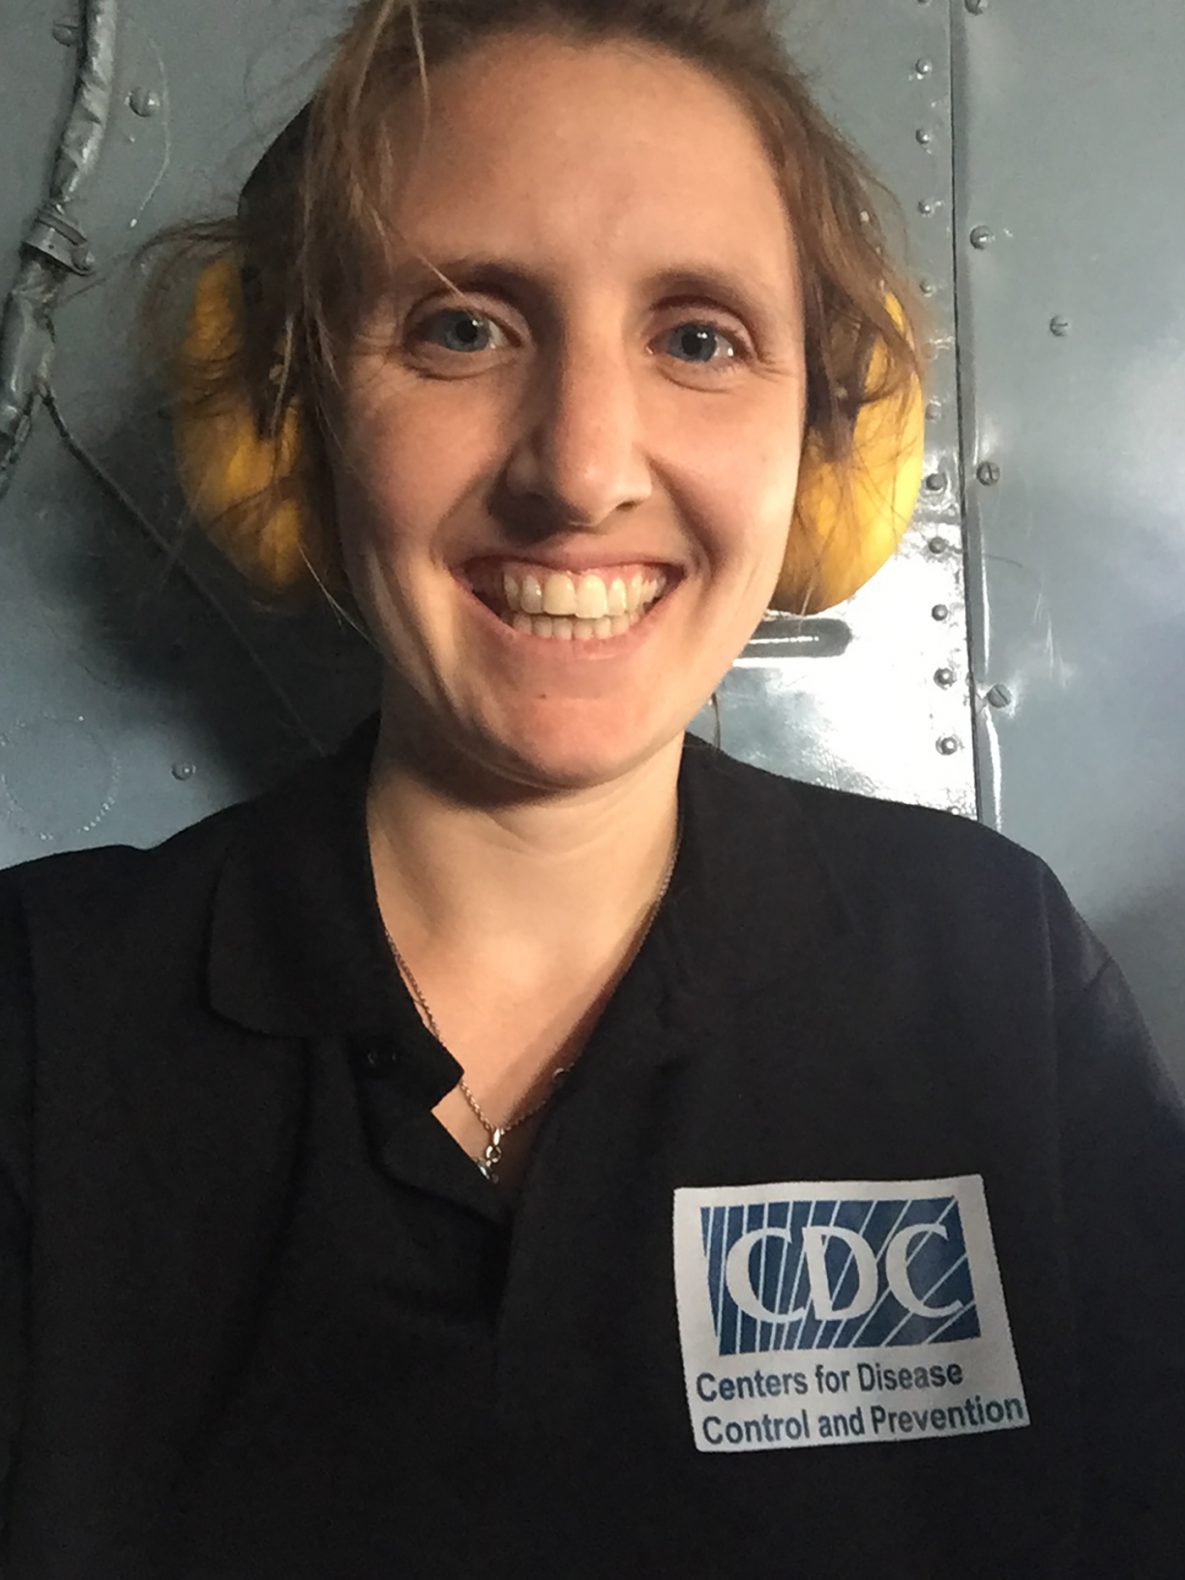 Epidemiologist Mary Claire Worrell deployed to Chowe in South Kivu via helicopter the day after the first Ebola case in South Kivu, DRC, was confirmed. She joined the team to help establish the Ebola response in the village of Chowe.